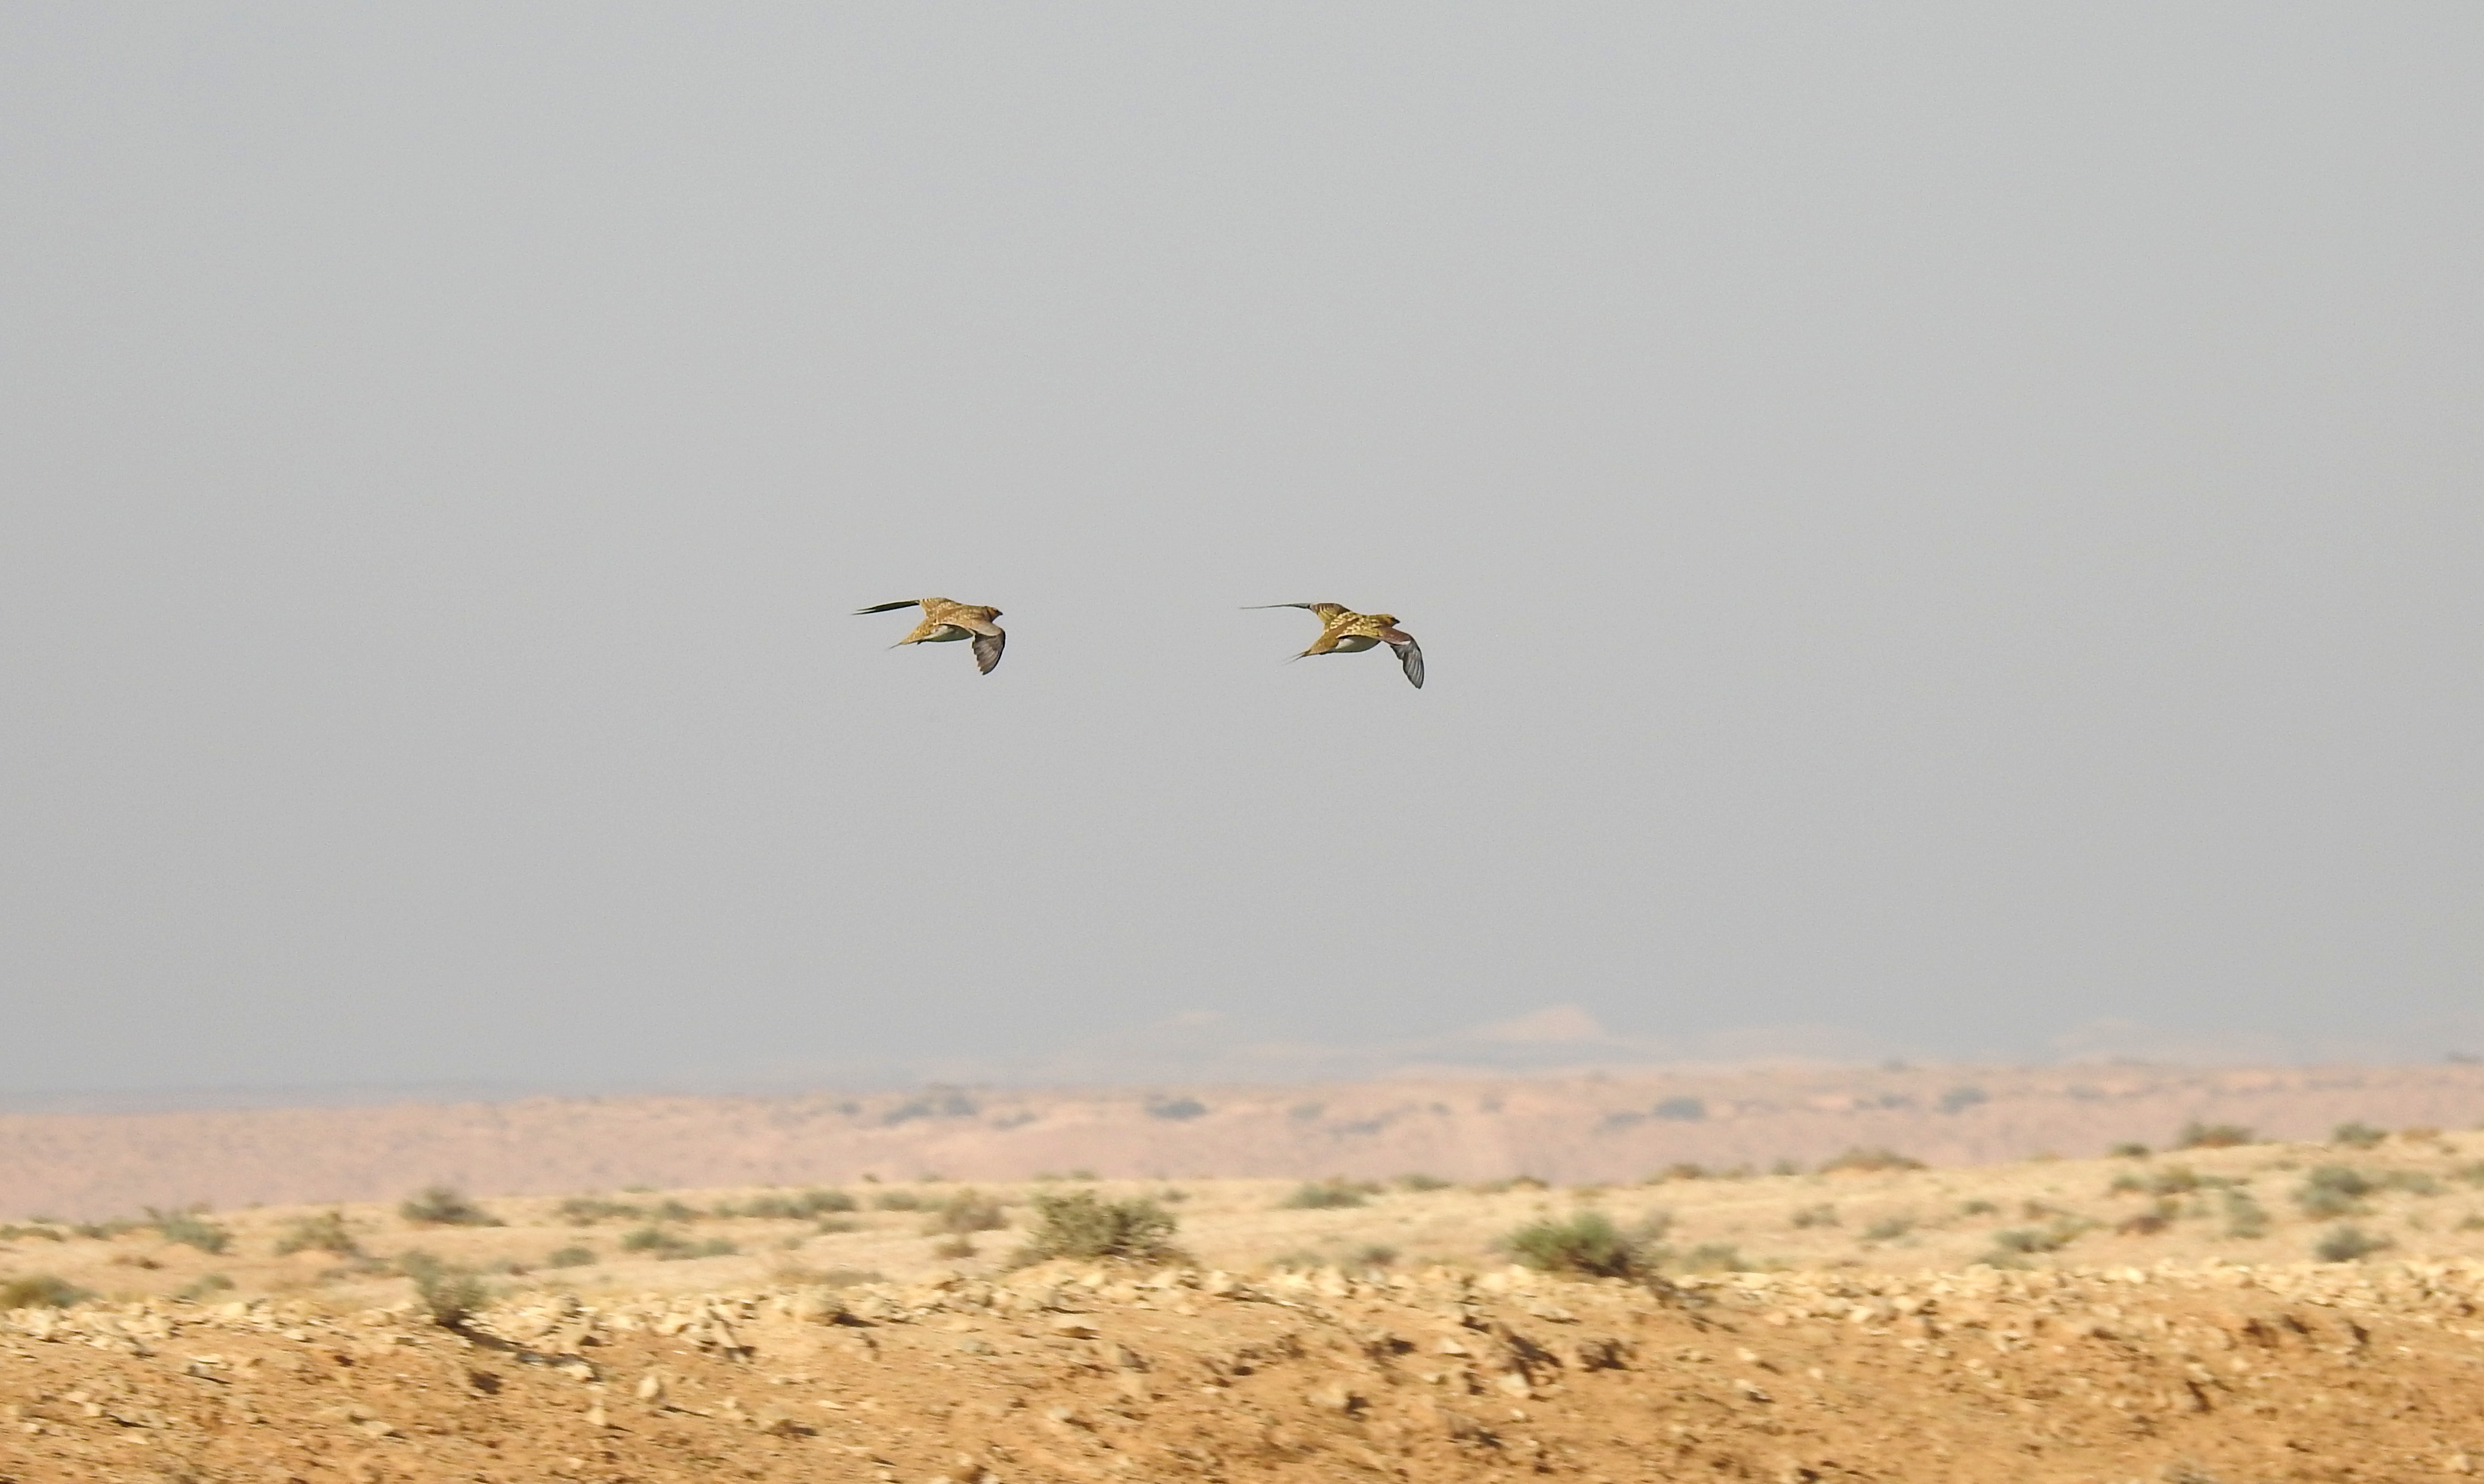 A pair of pin-tailed sandgrouse zipping by